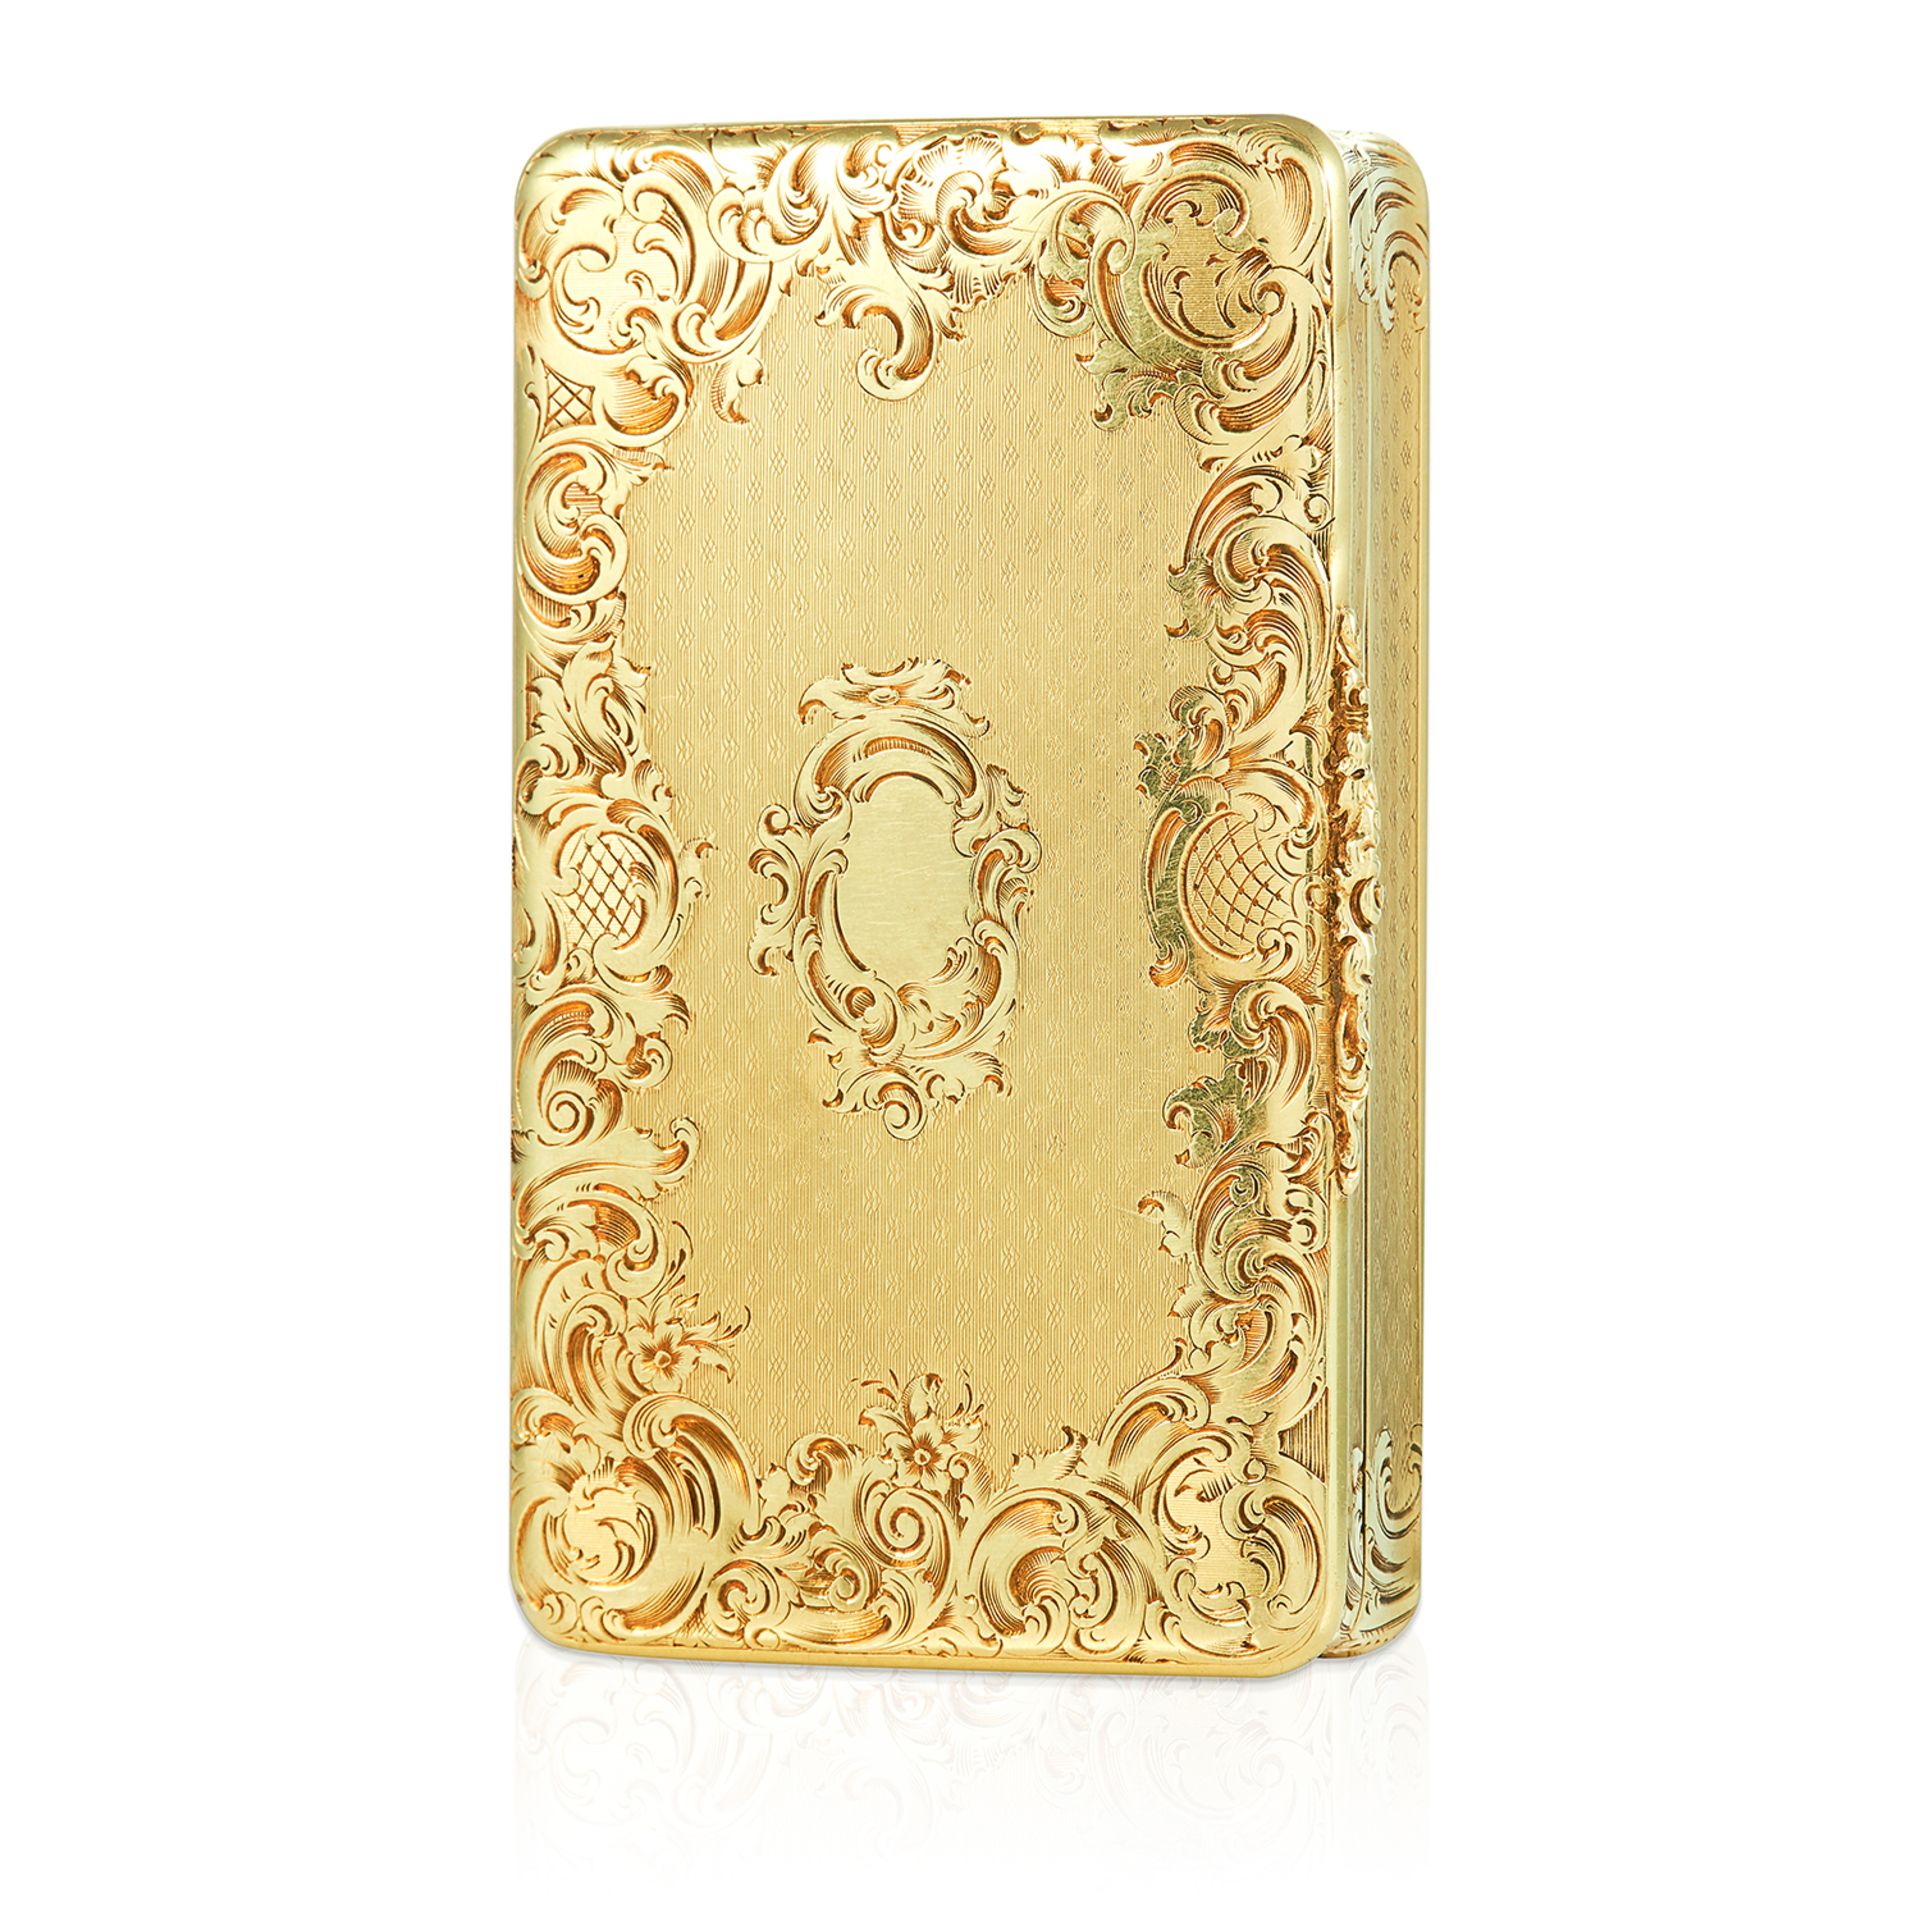 AN ANTIQUE GOLD SNUFF BOX, 19TH CENTURY in high carat yellow gold, rounded rectangular form with